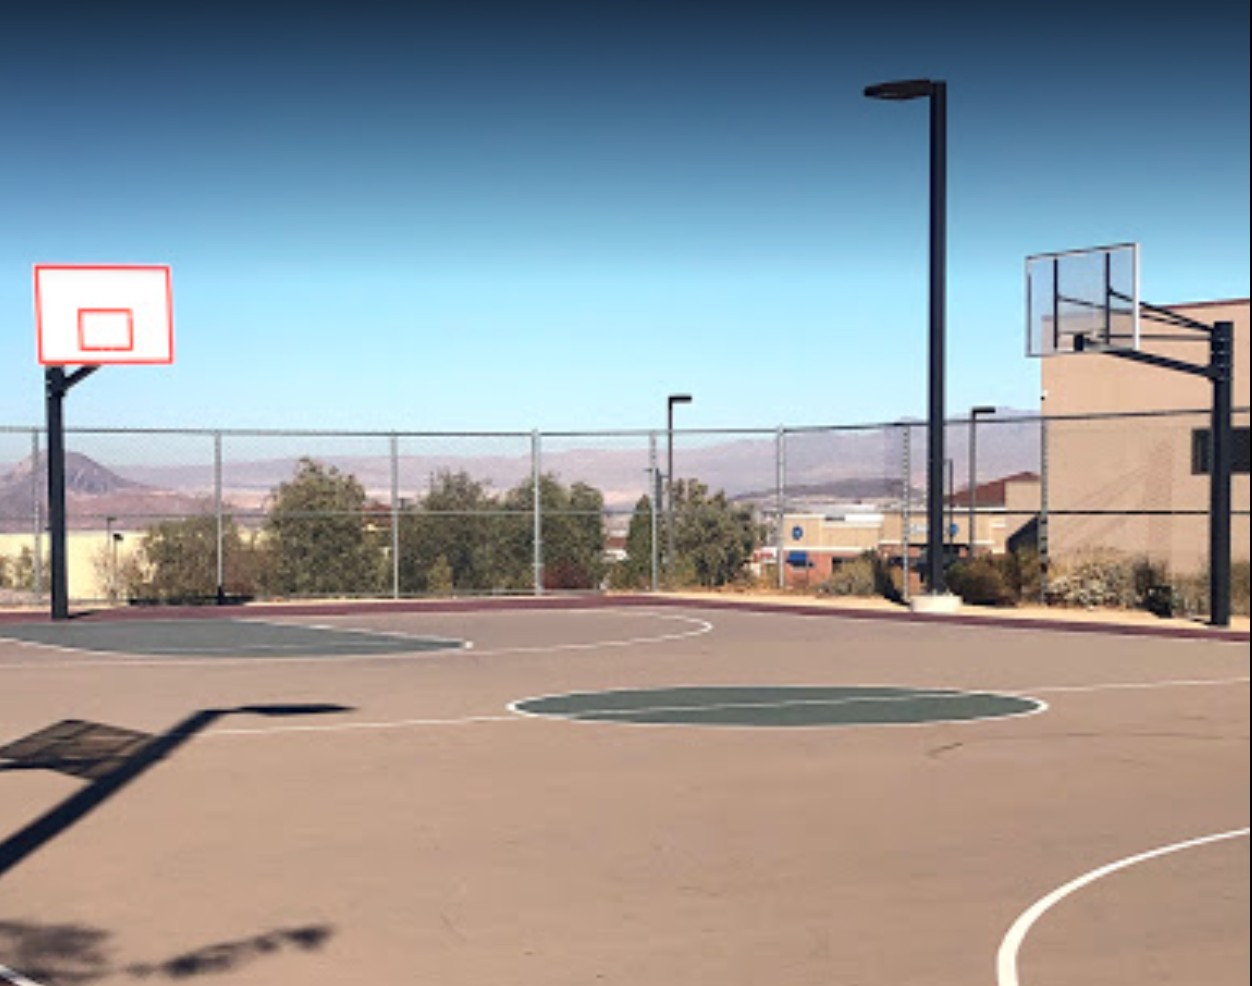 The Top 10 Basketball Courts in Las Vegas Courts of the World